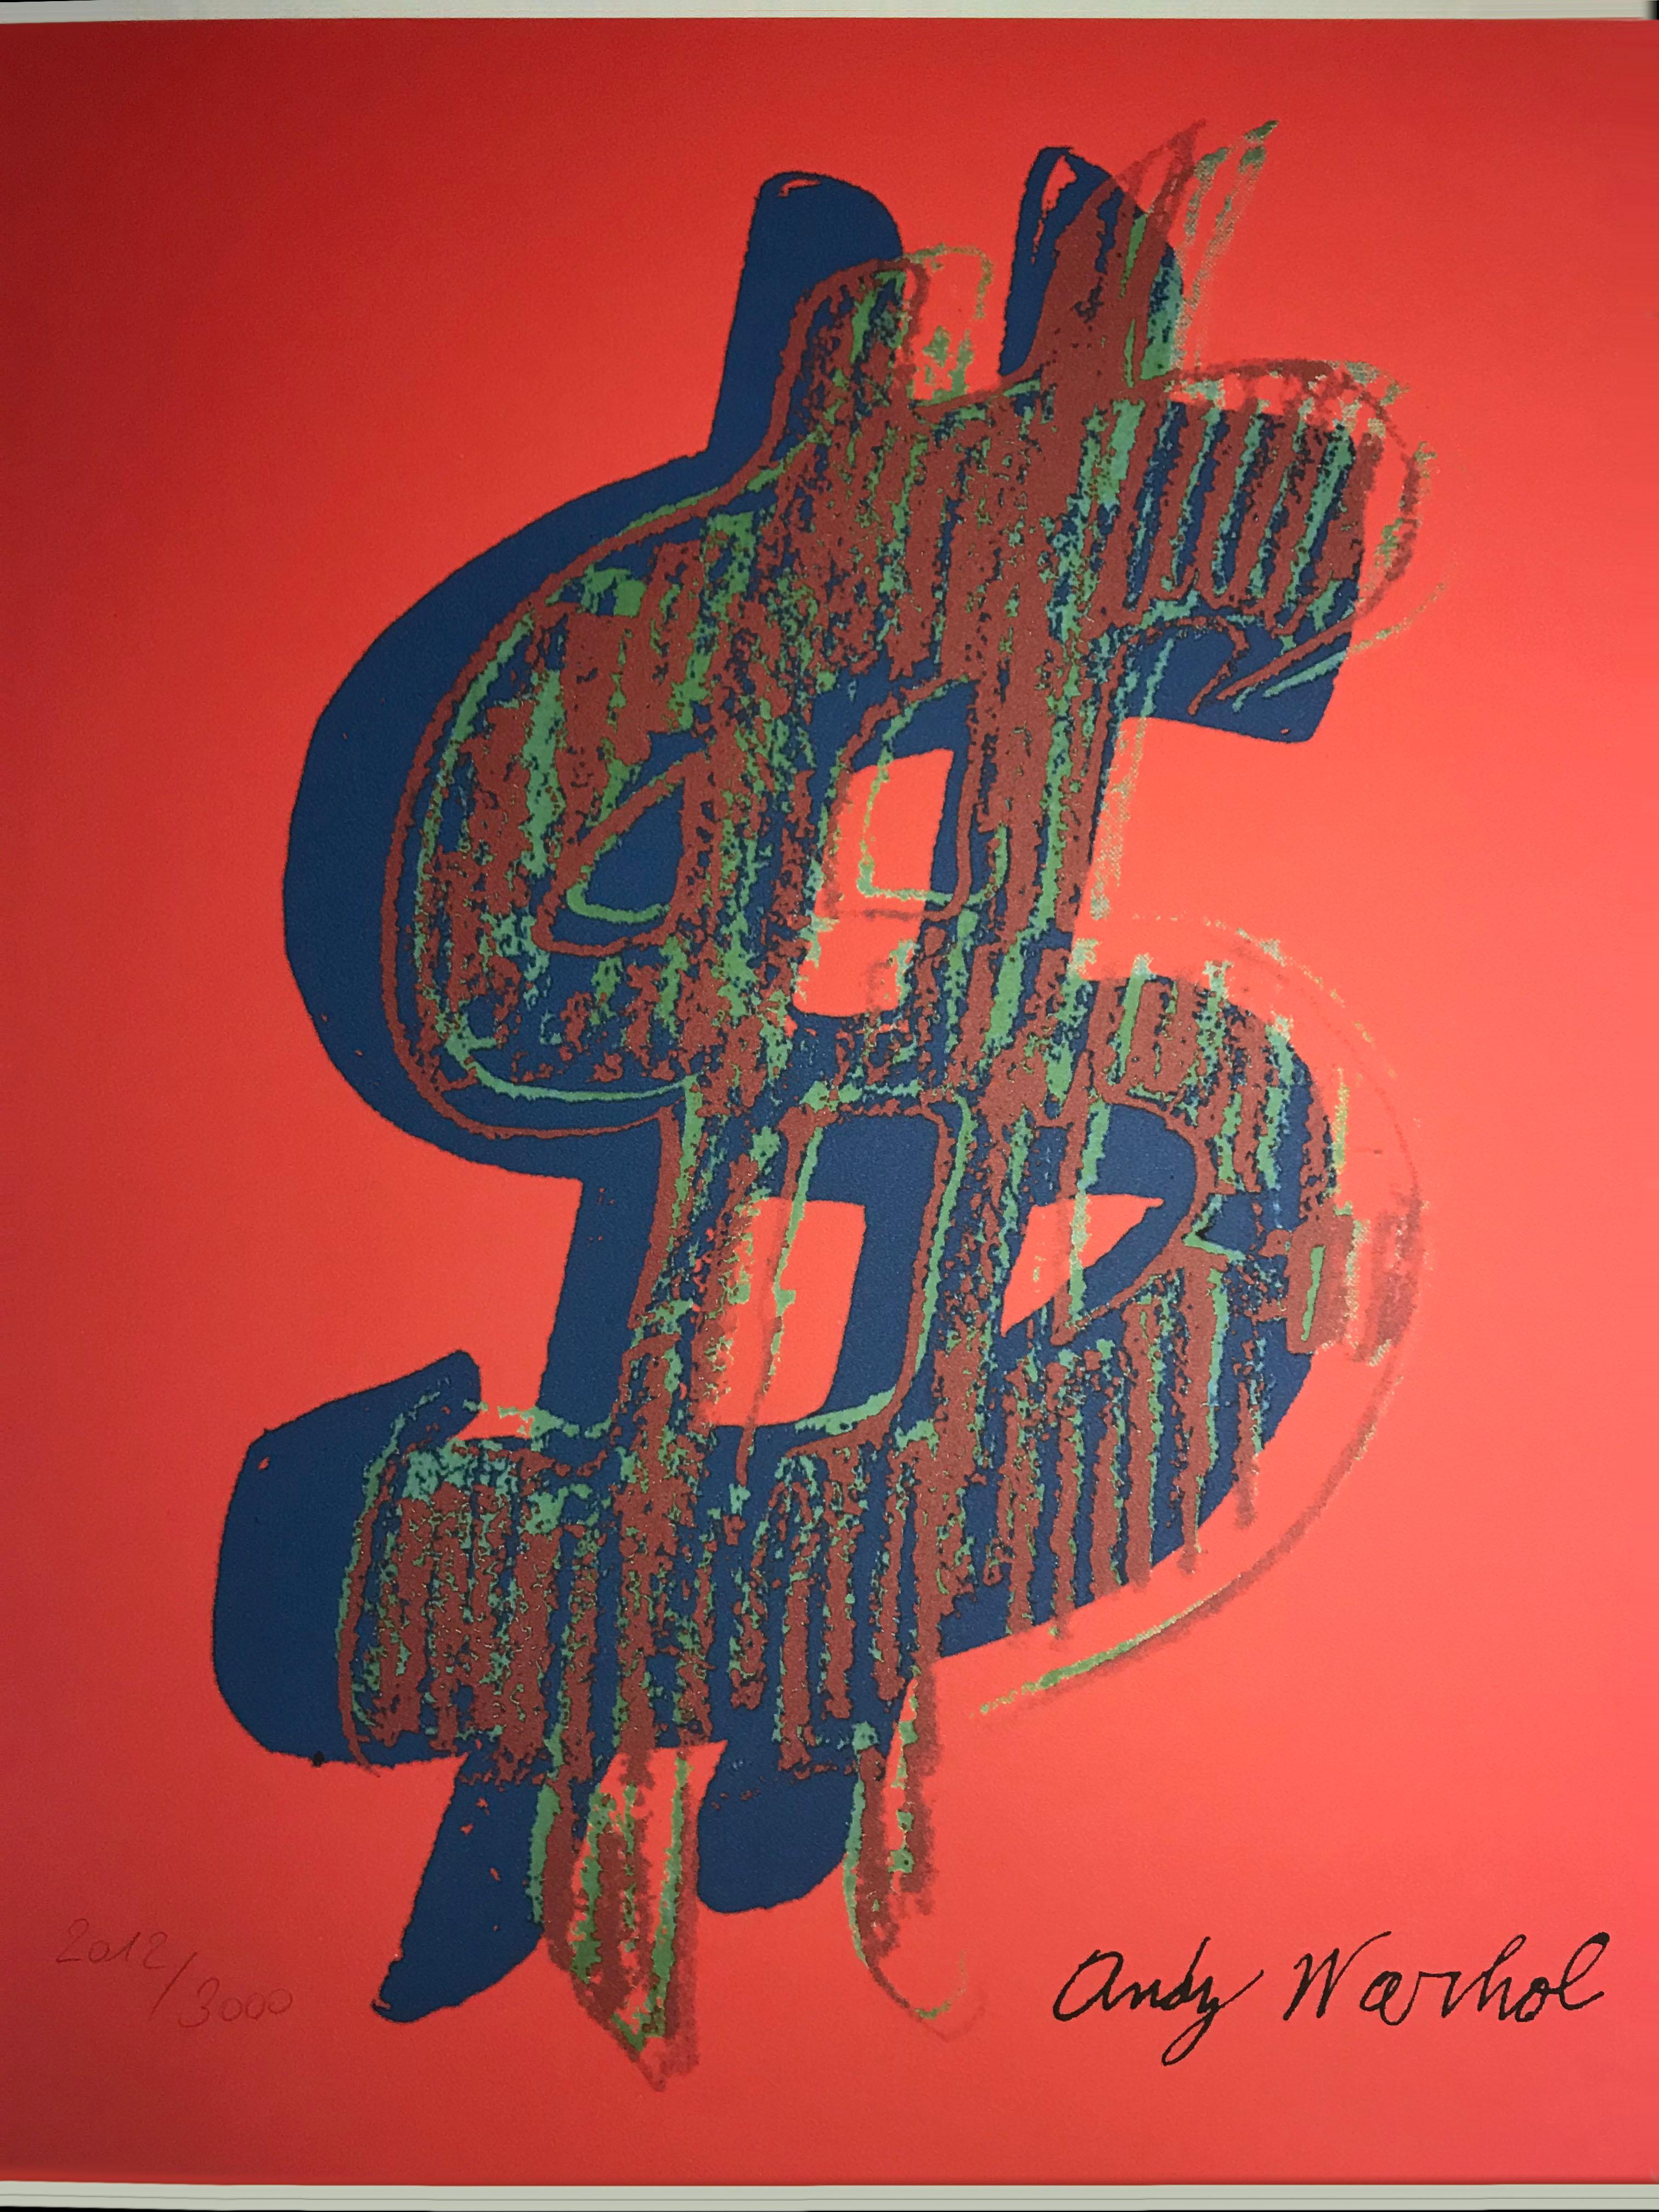 Granolithography Dollar sign in red Andy warhol 1986 - Mixed Media Art by Andy Warhol